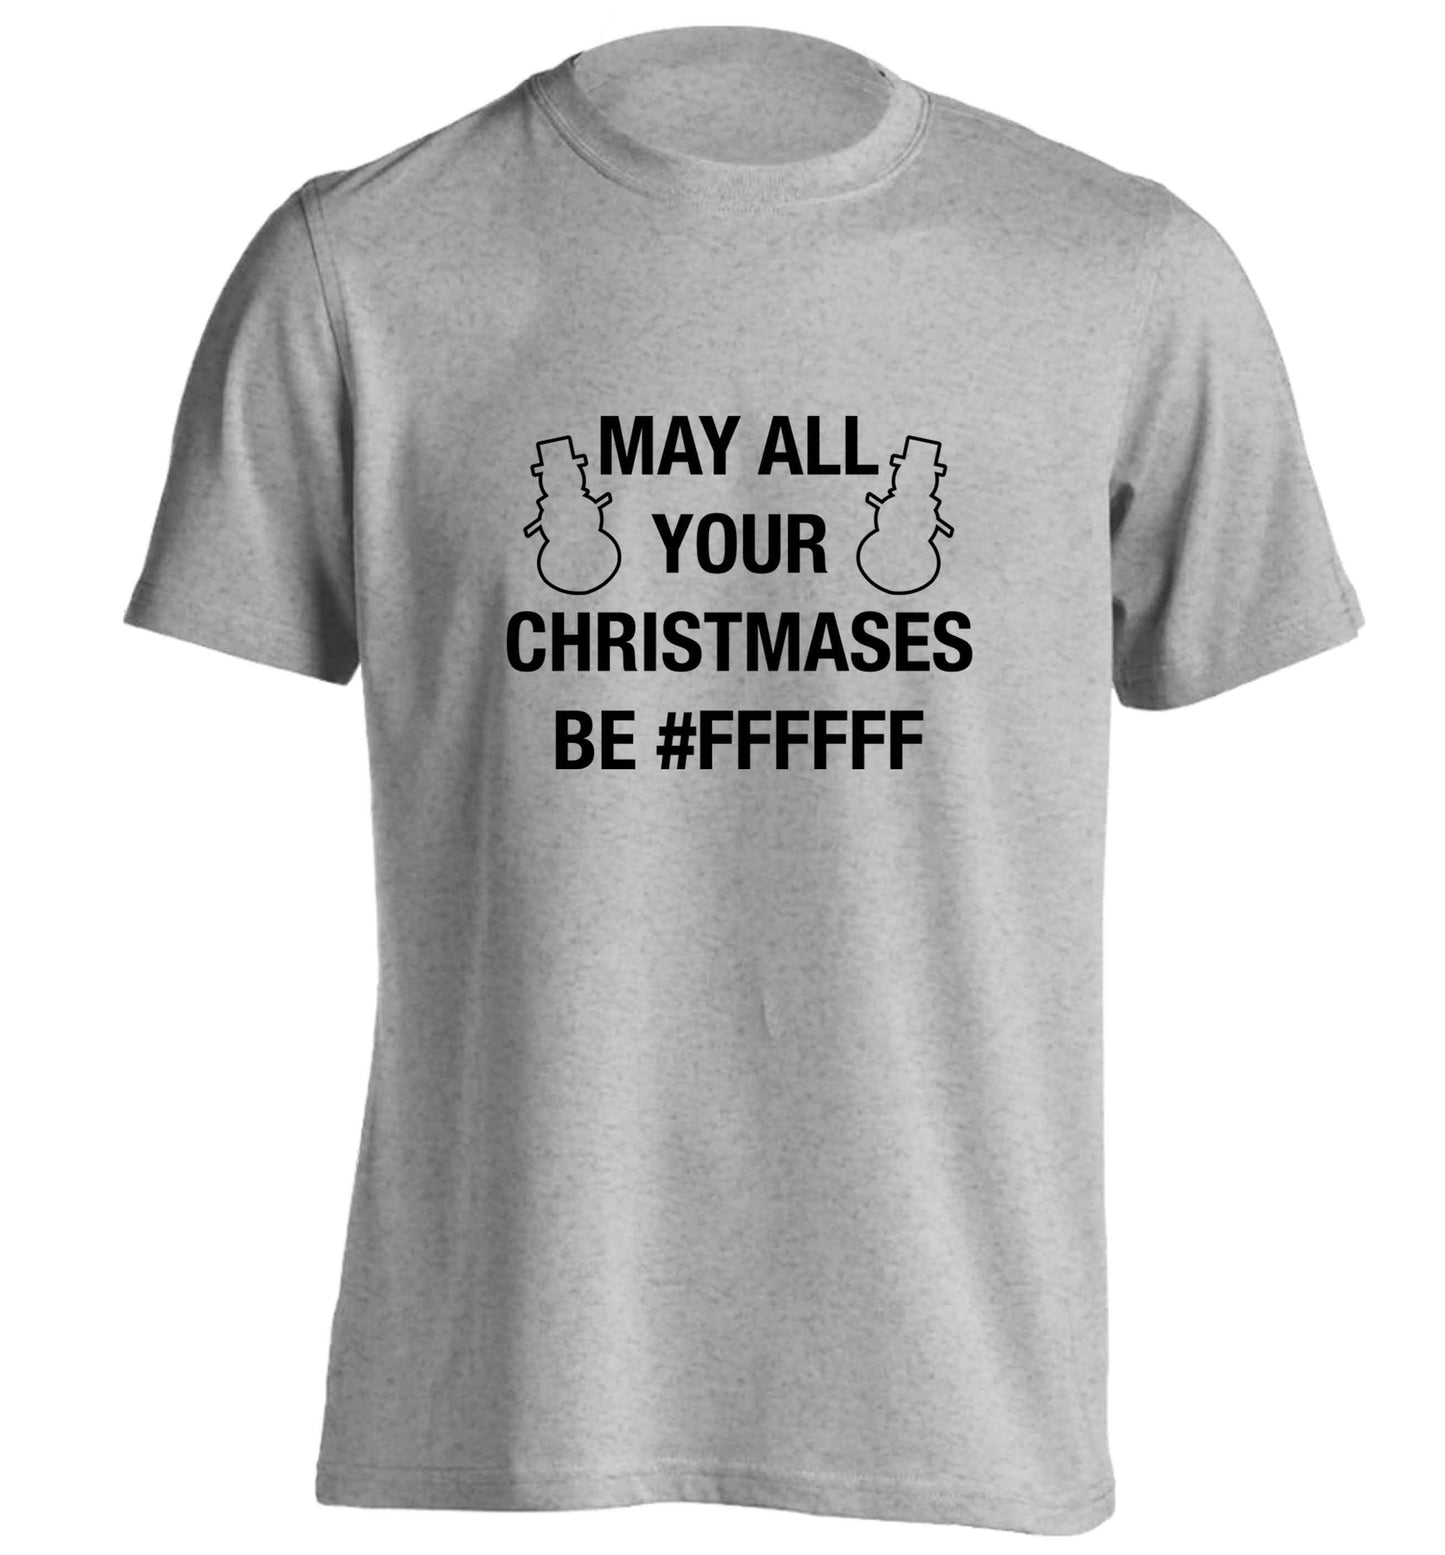 May all your Christmases be #FFFFFF adults unisex grey Tshirt 2XL